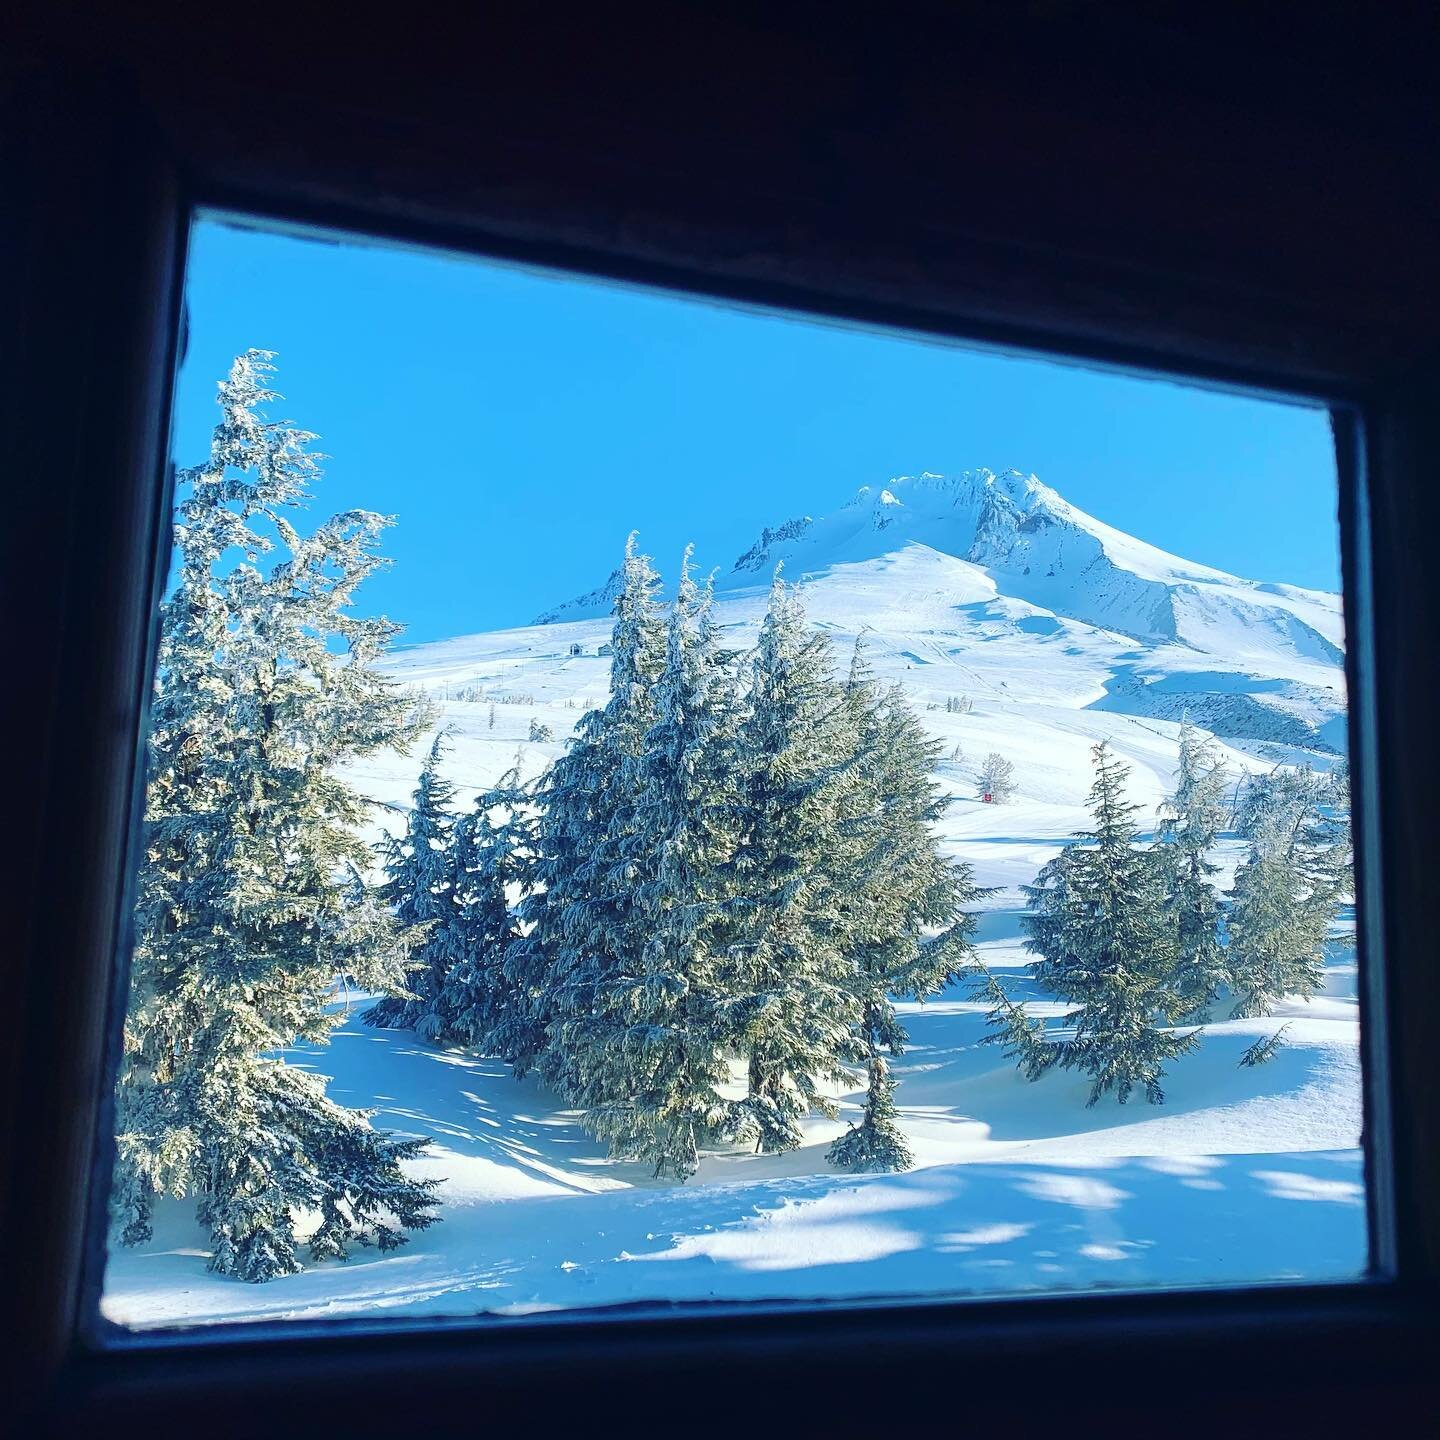 📍Mt Hood as seen from @timberlinelodge (On Cascades, Grand Ronde, Siletz land, &ldquo;Wy&rsquo;east&rdquo; is what many claim as one of the first names given to it).

Mt Hood in many ways has felt like my North Star since moving to Oregon. I&rsquo;l